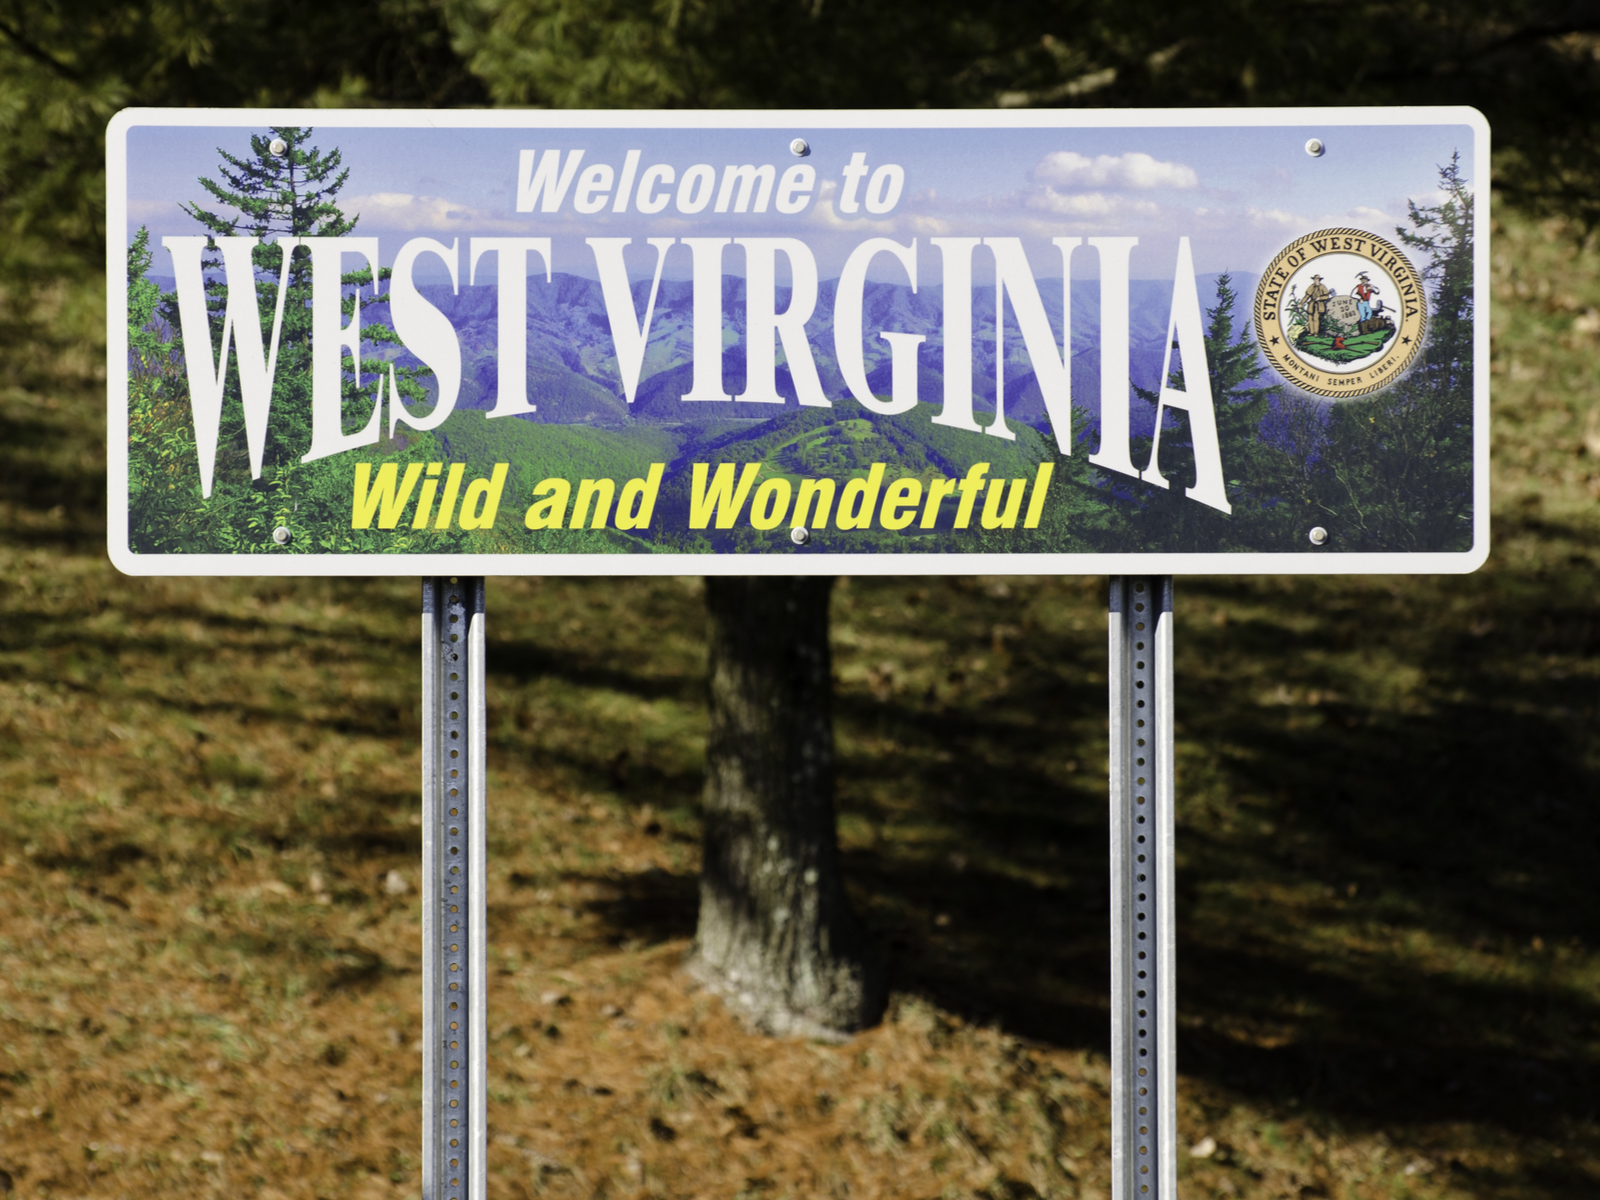 A welcome sign of West Virginia saying "Wild and Wonderful" hinting the best attractions in West Virginia